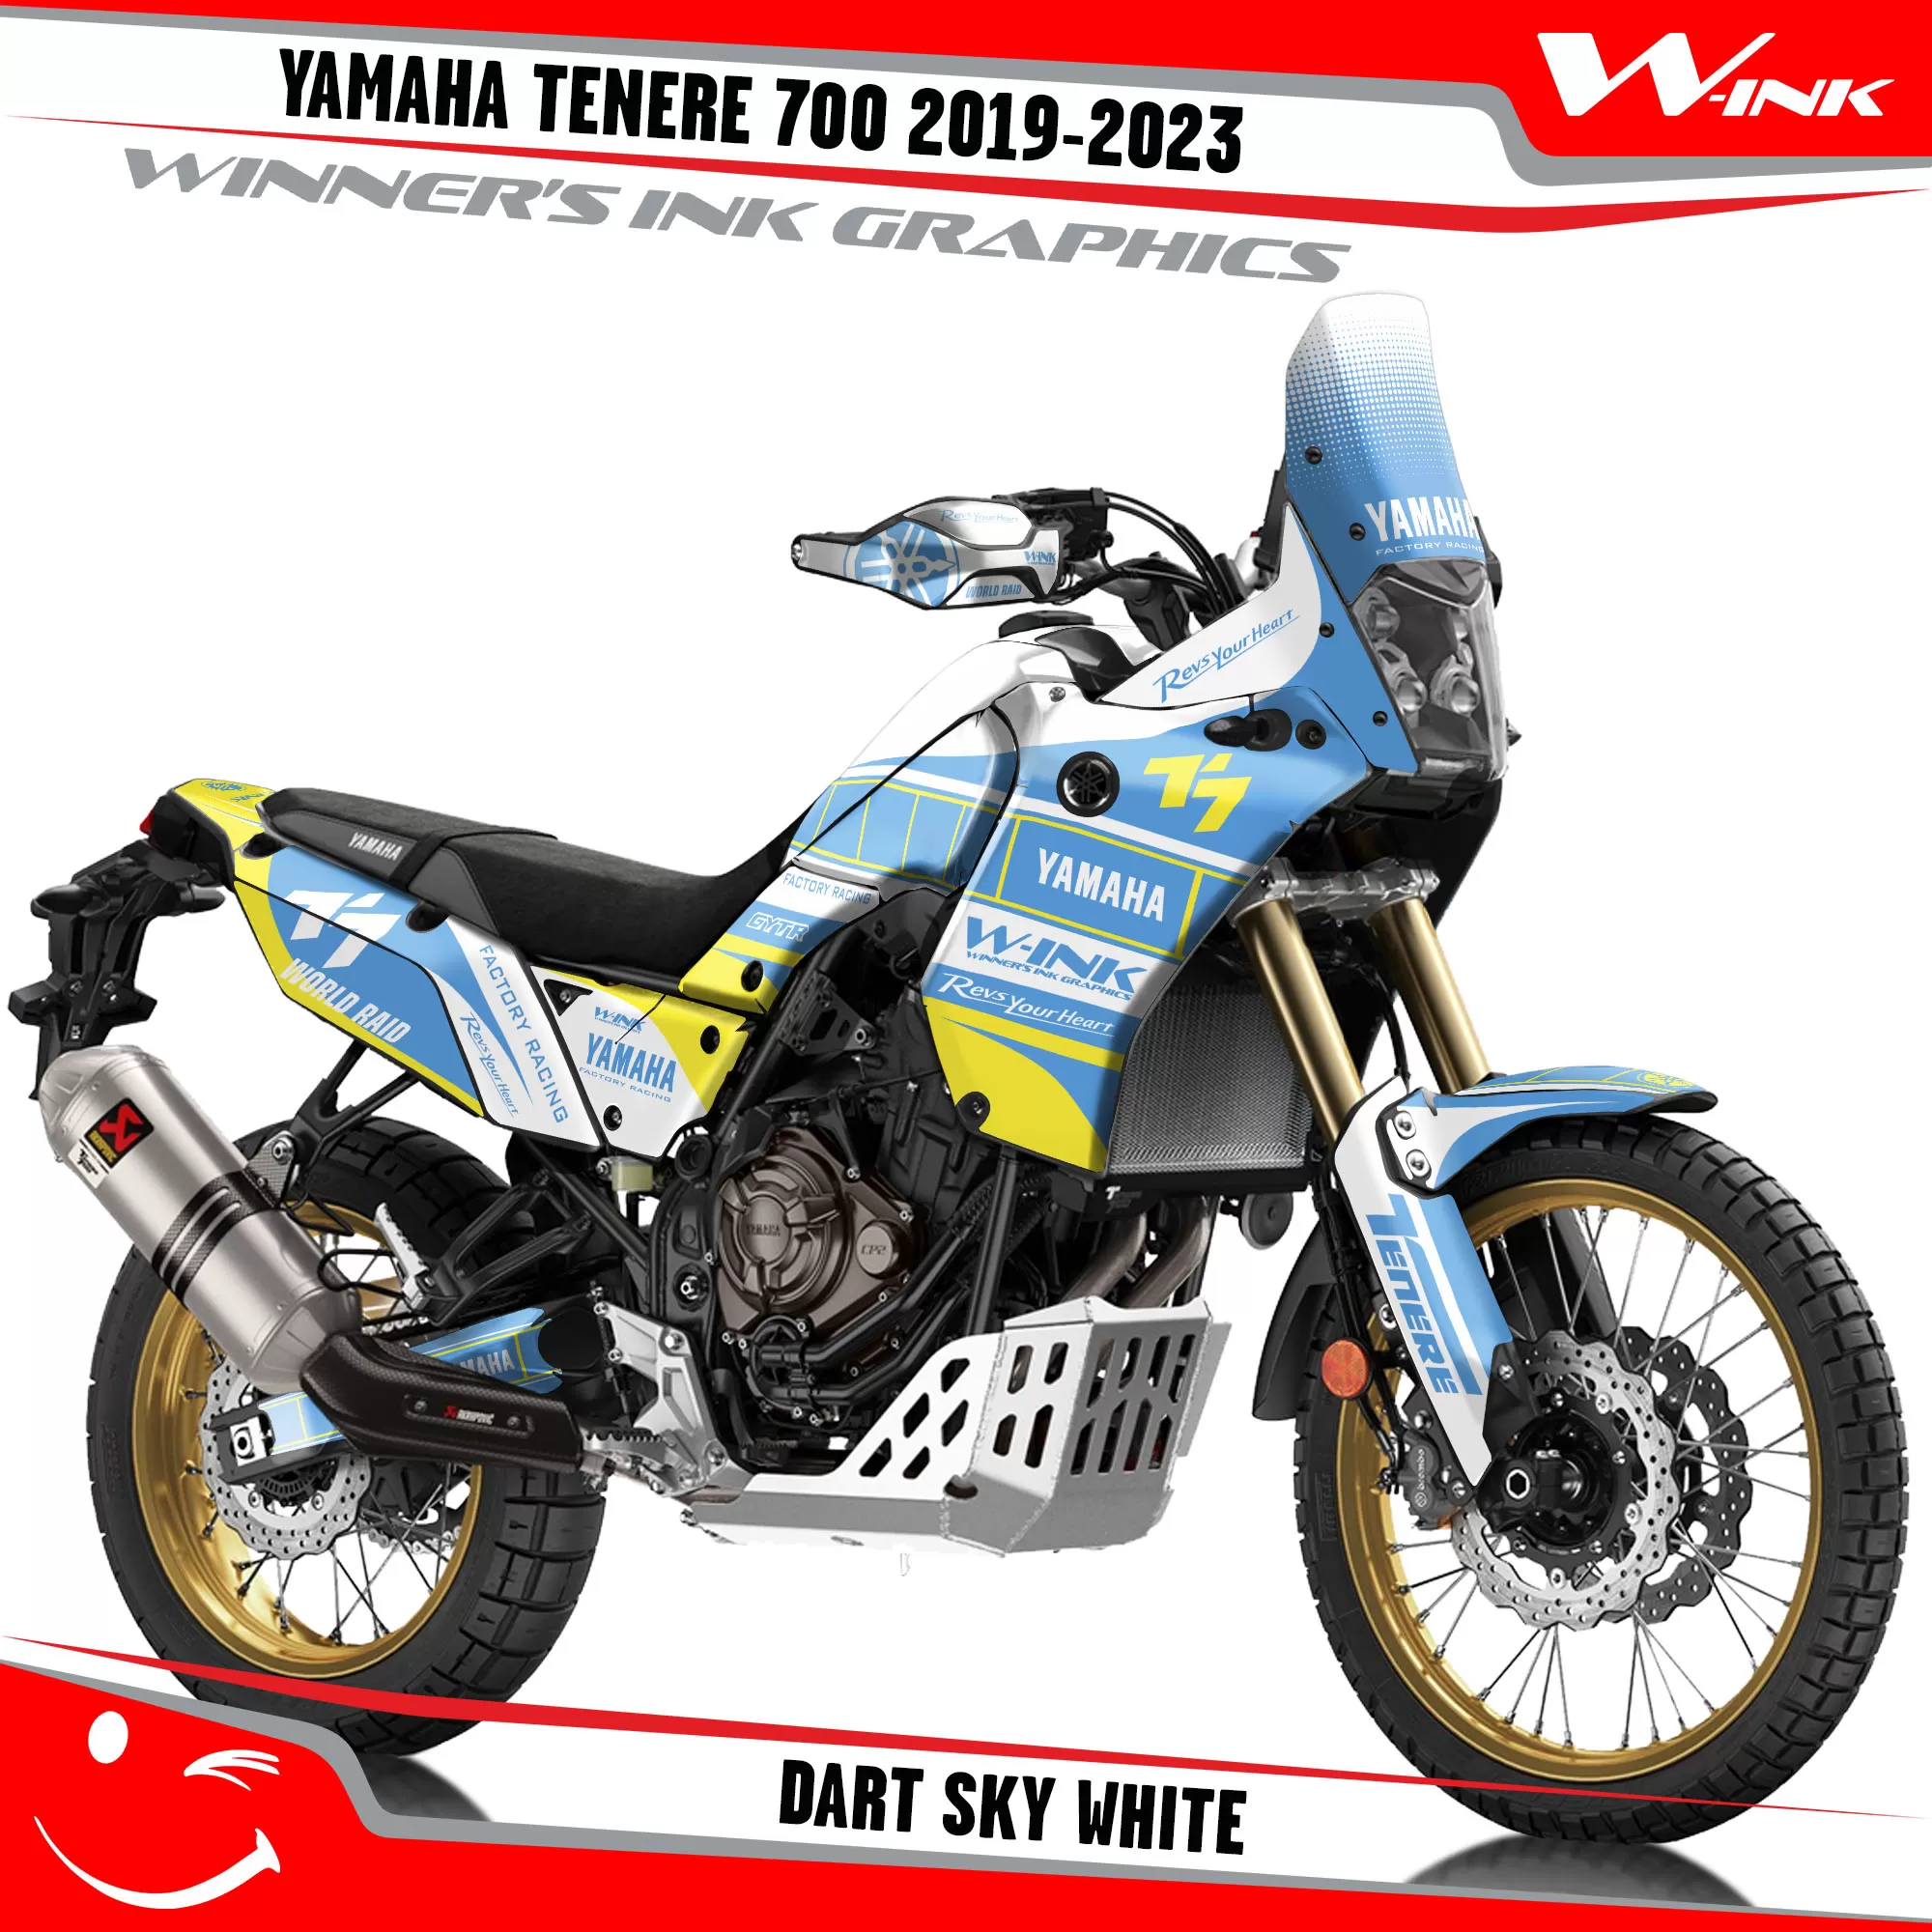 Yamaha-Tenere-700-2019-2020-2021-2022-2023-graphics-kit-and-decals-with-desing-Dart-Sky-White